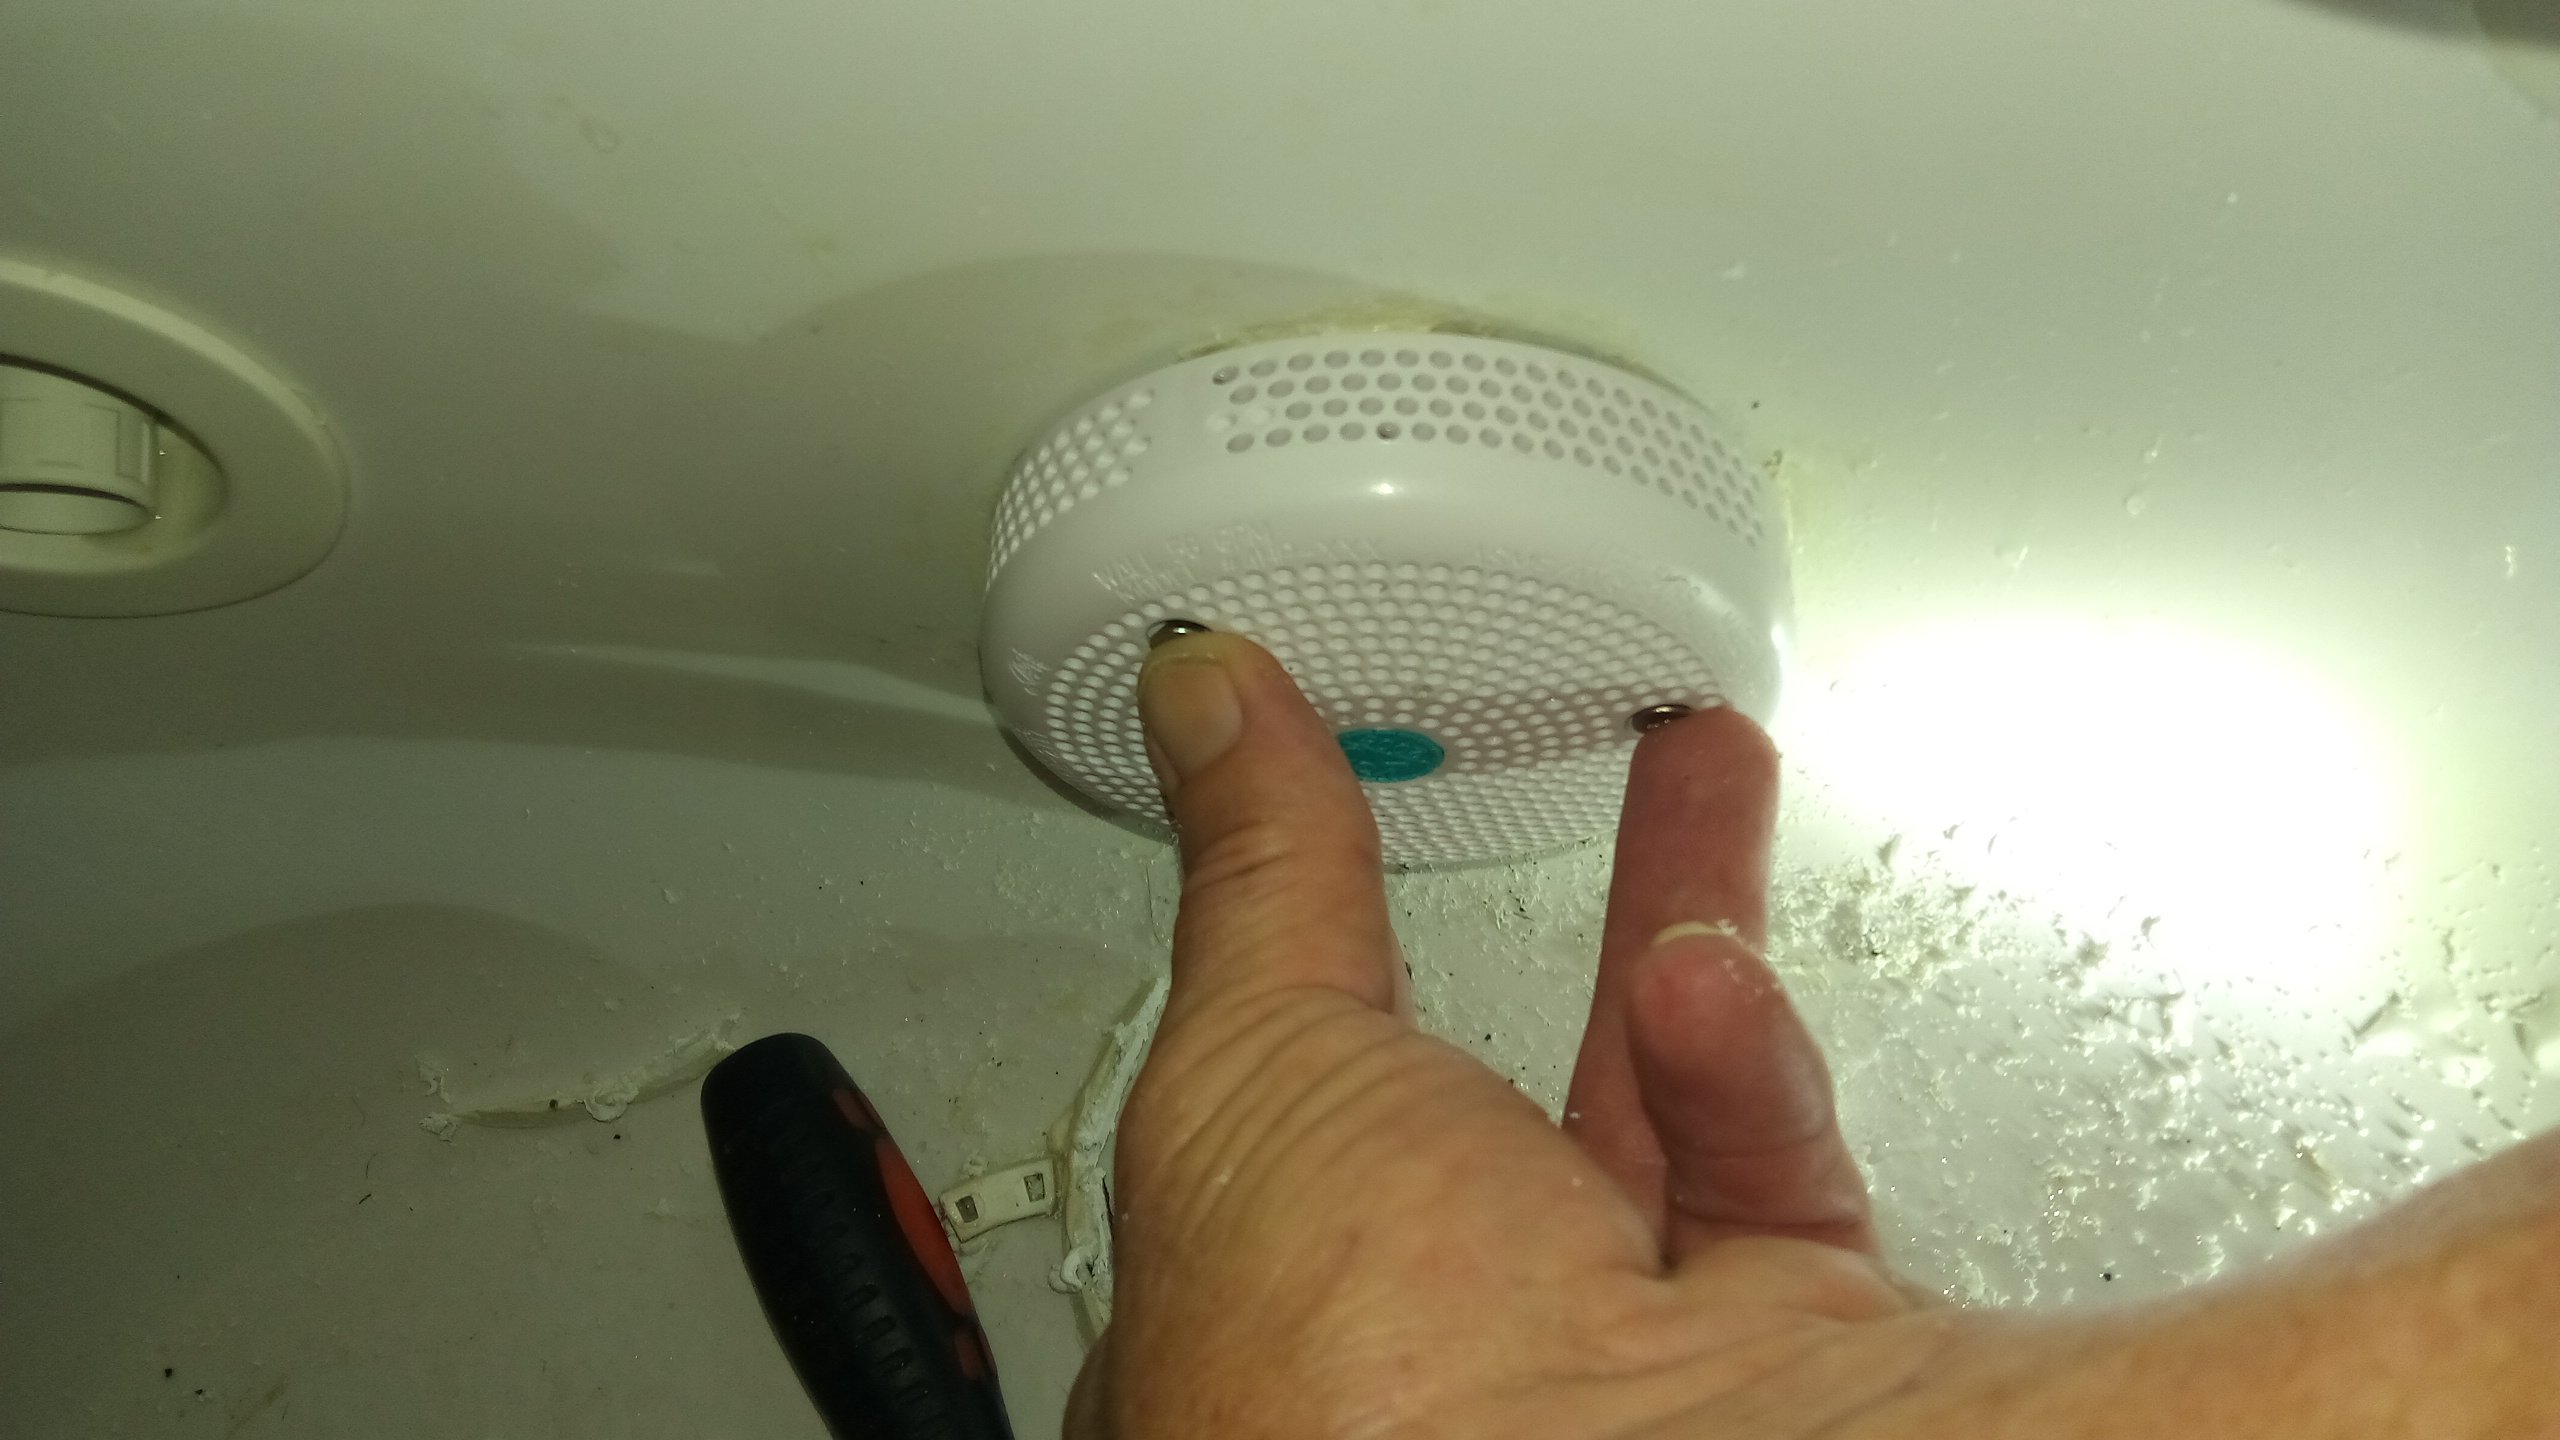 Replacing a Suction Cover on a Jetted Bathtub Drain